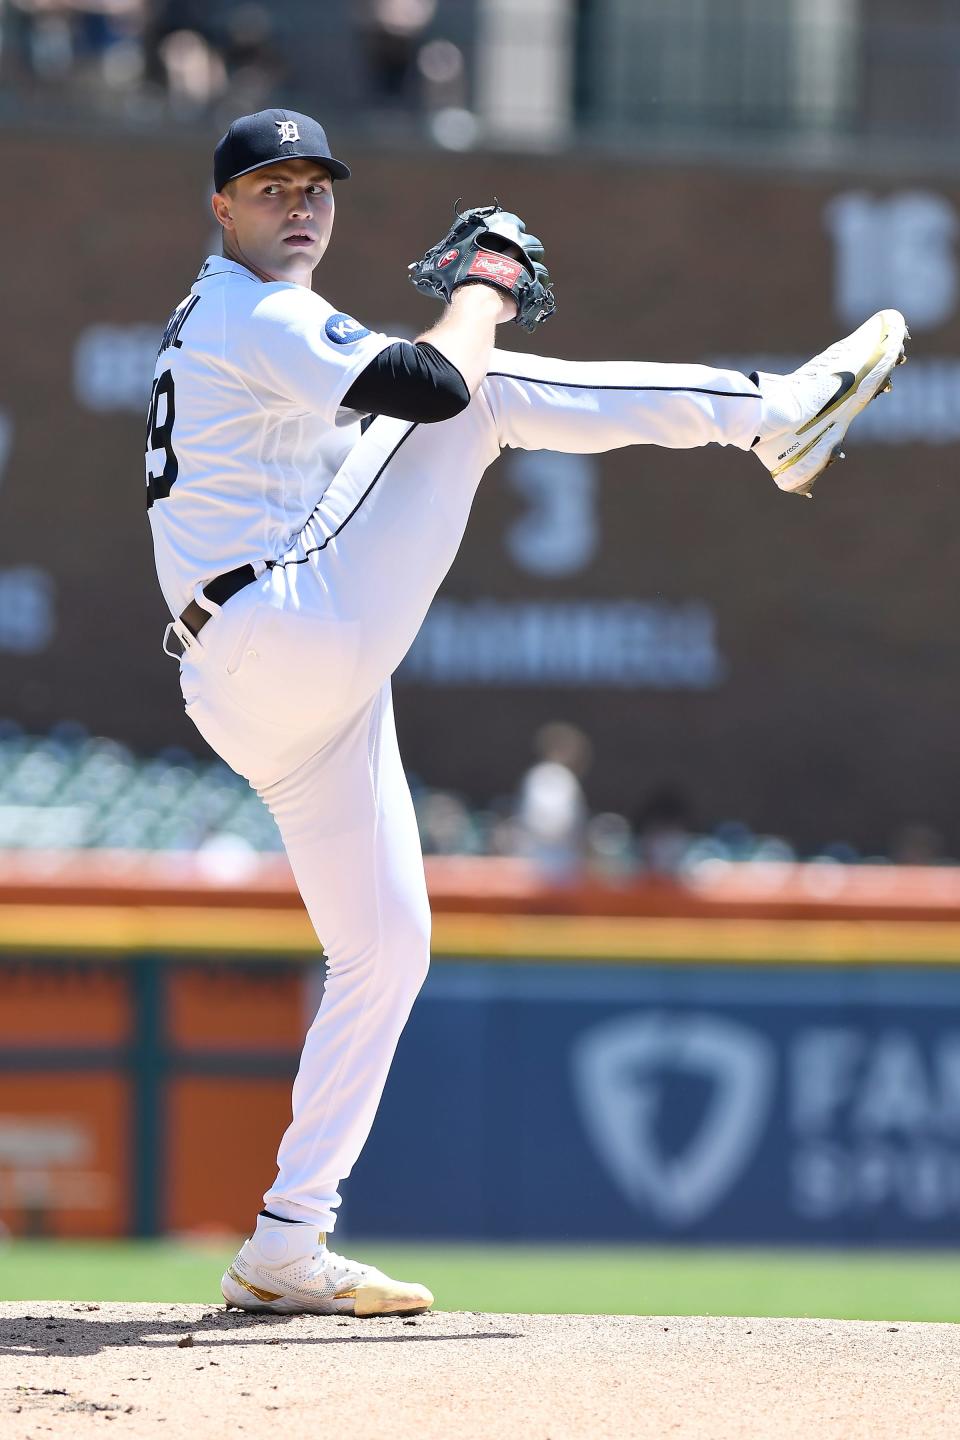 Tigers pitcher Tarik Skubal winds up to throw in the first inning against the Orioles in Detroit, Sunday, May 15, 2022.